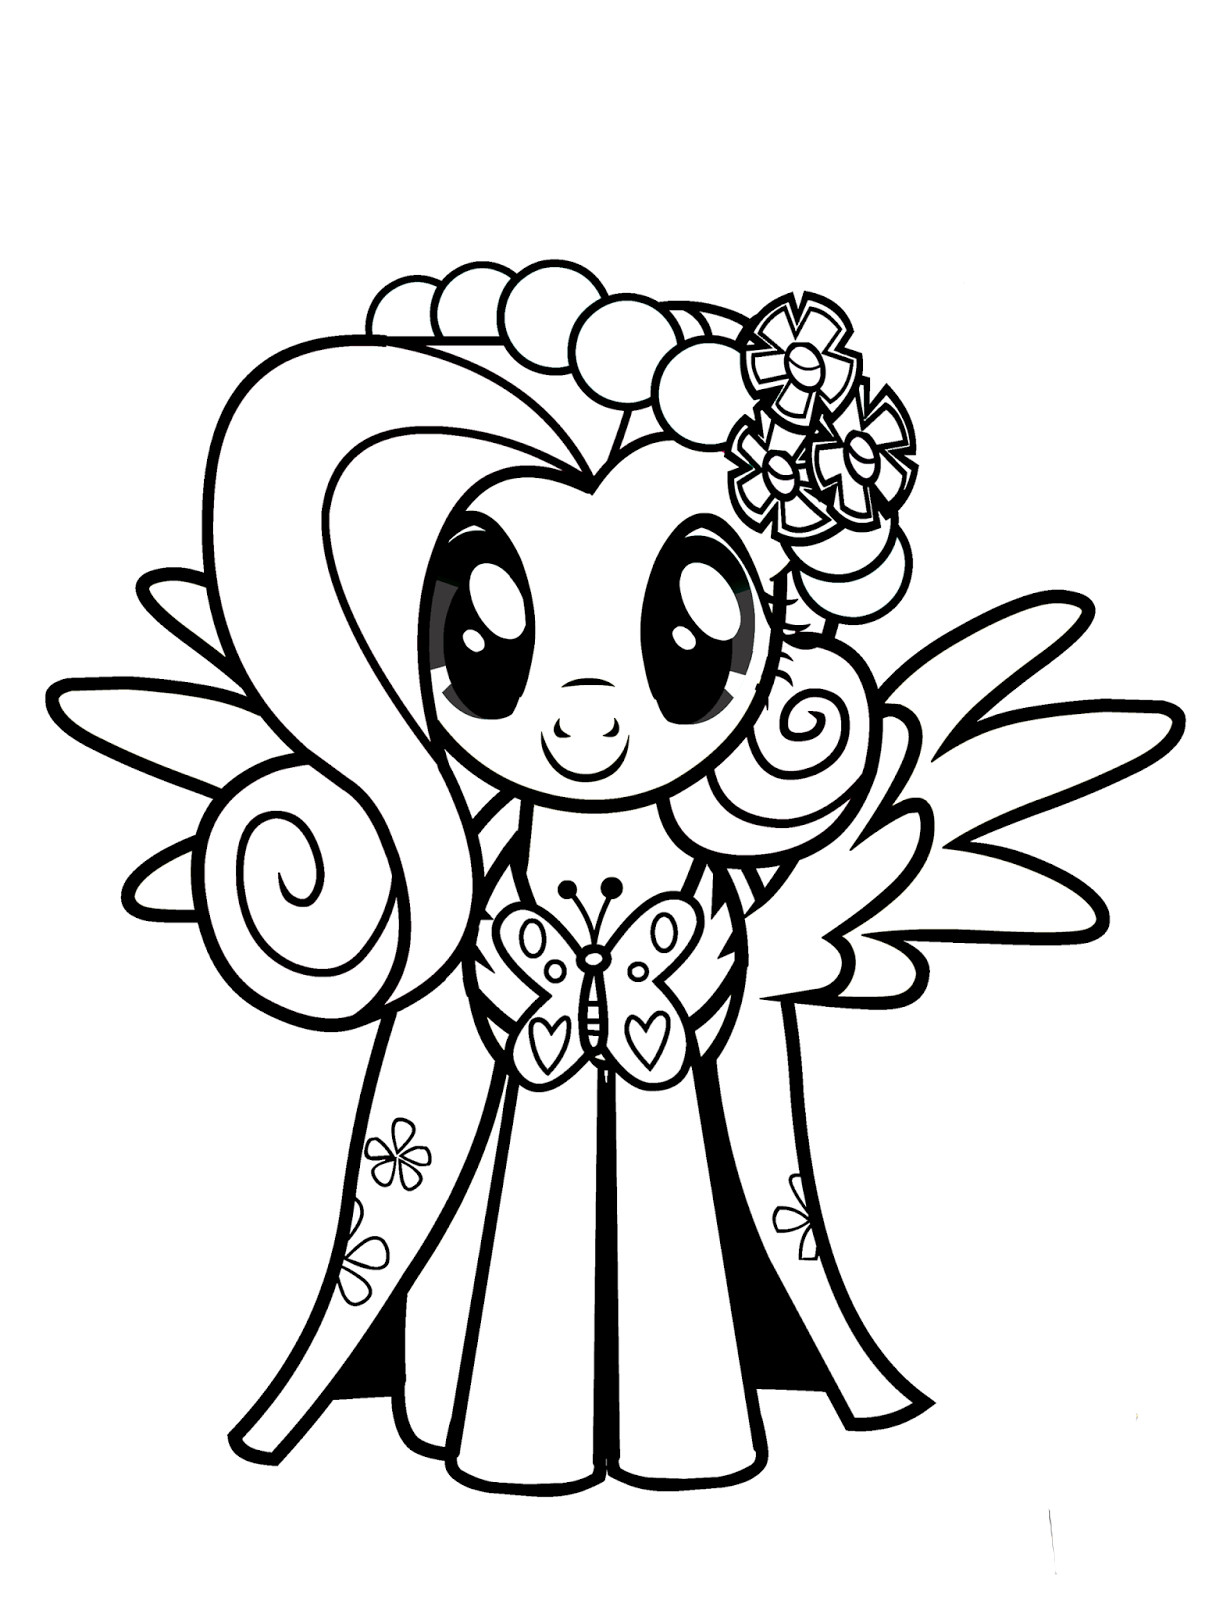 Kids Coloring Pages My Little Pony
 Fluttershy Coloring Pages Best Coloring Pages For Kids